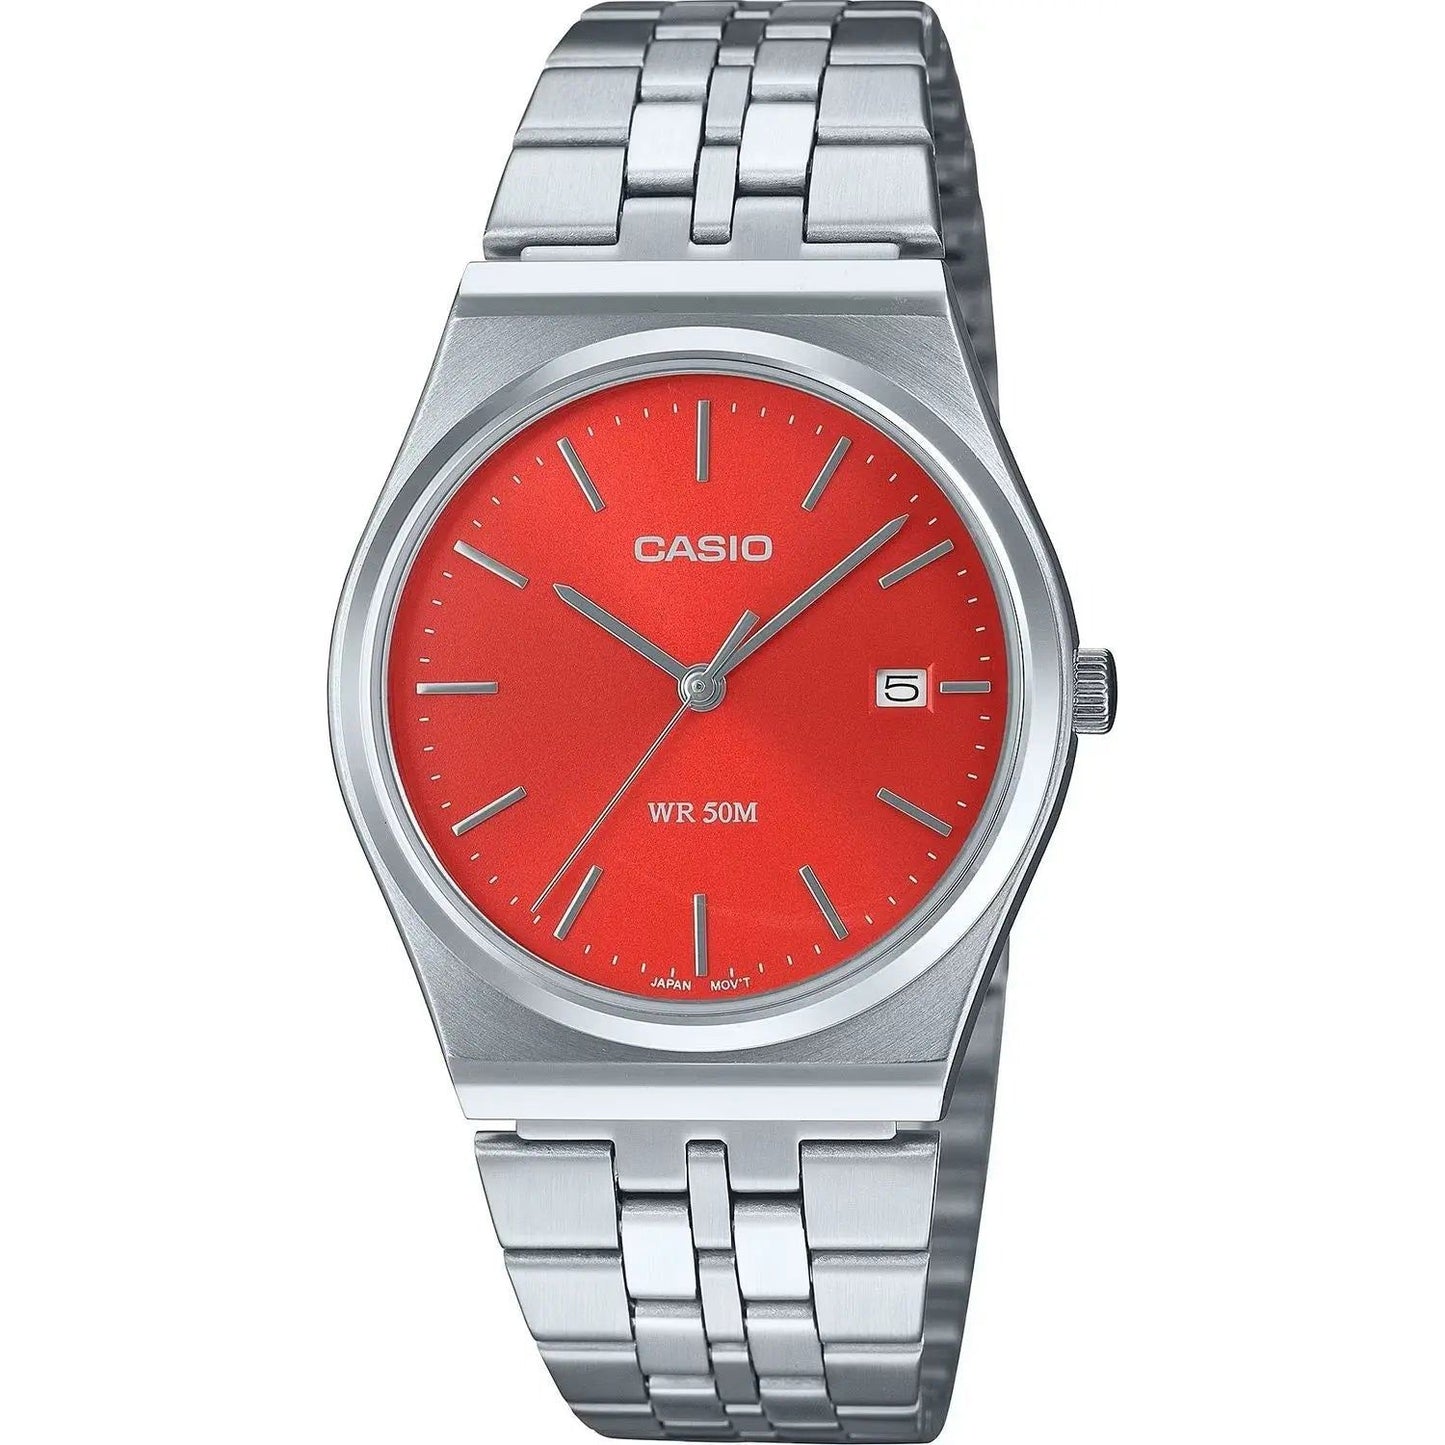 CASIO CASIO COLLECTION Mod. DATE RED WATCHES casio-collection-mod-date-red